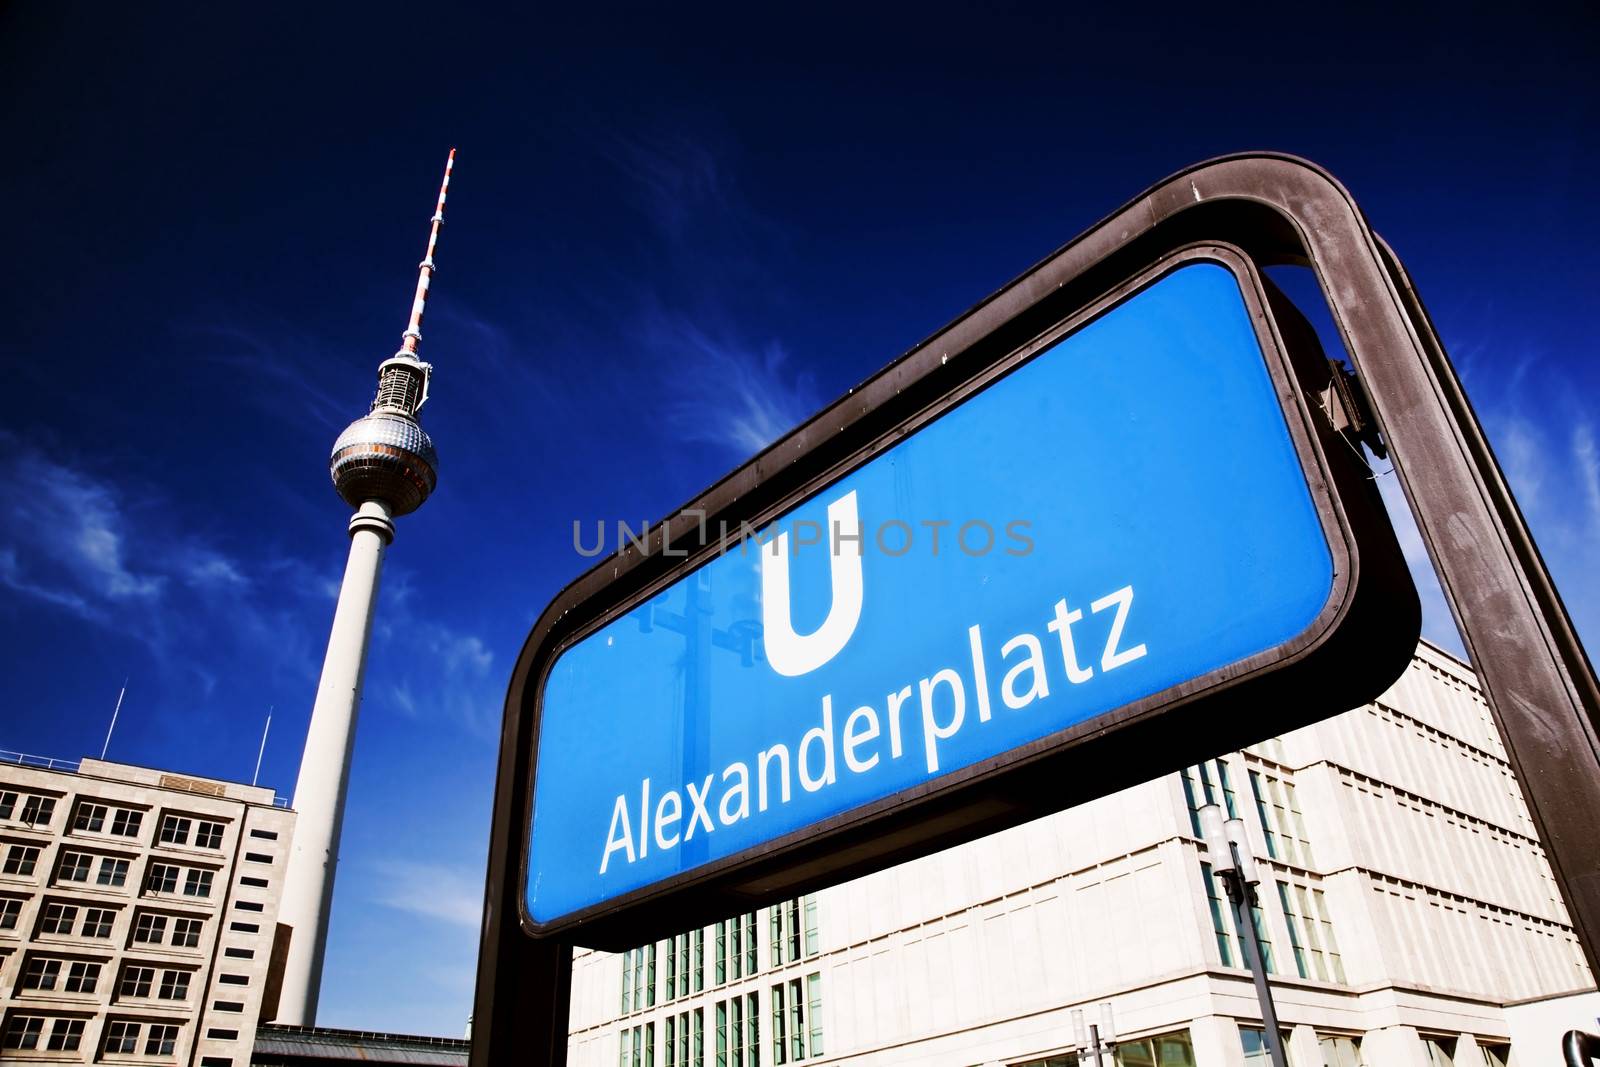 U-bahn Alexanderplatz sign and Television tower. Berlin, Germany by photocreo